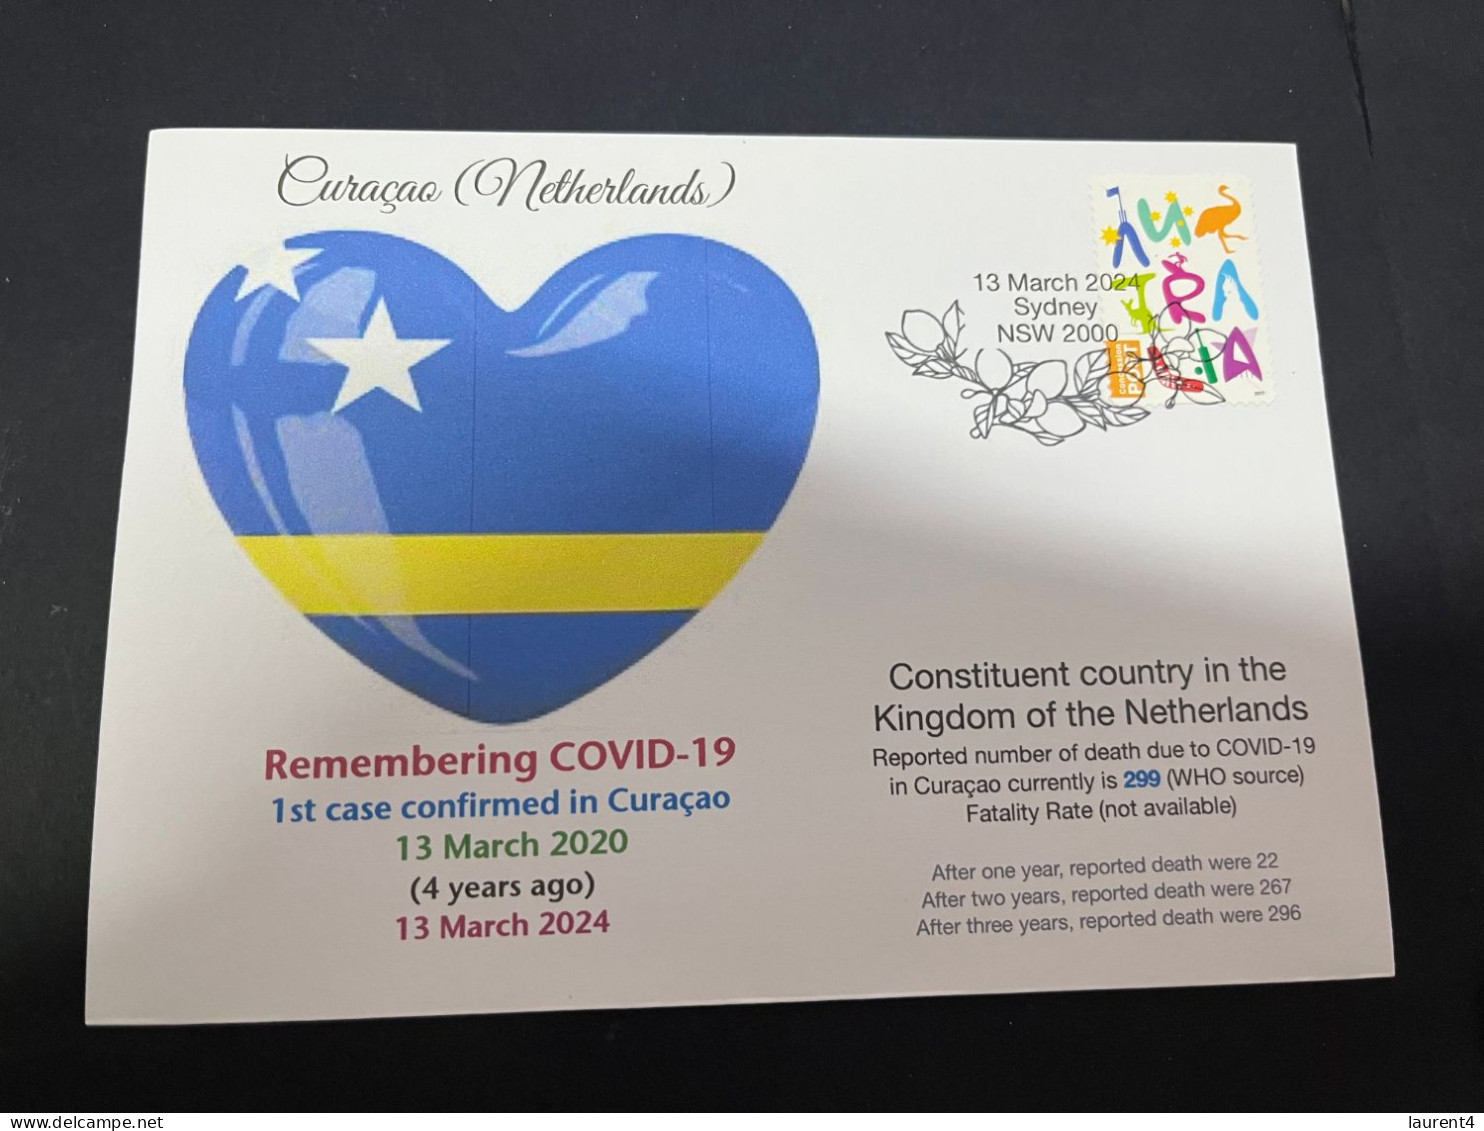 13-3-2024 (2 Y 52) COVID-19 4th Anniversary - Curaçao (Netherlands) - 13 March 2024 (with Australian Stamp) - Disease